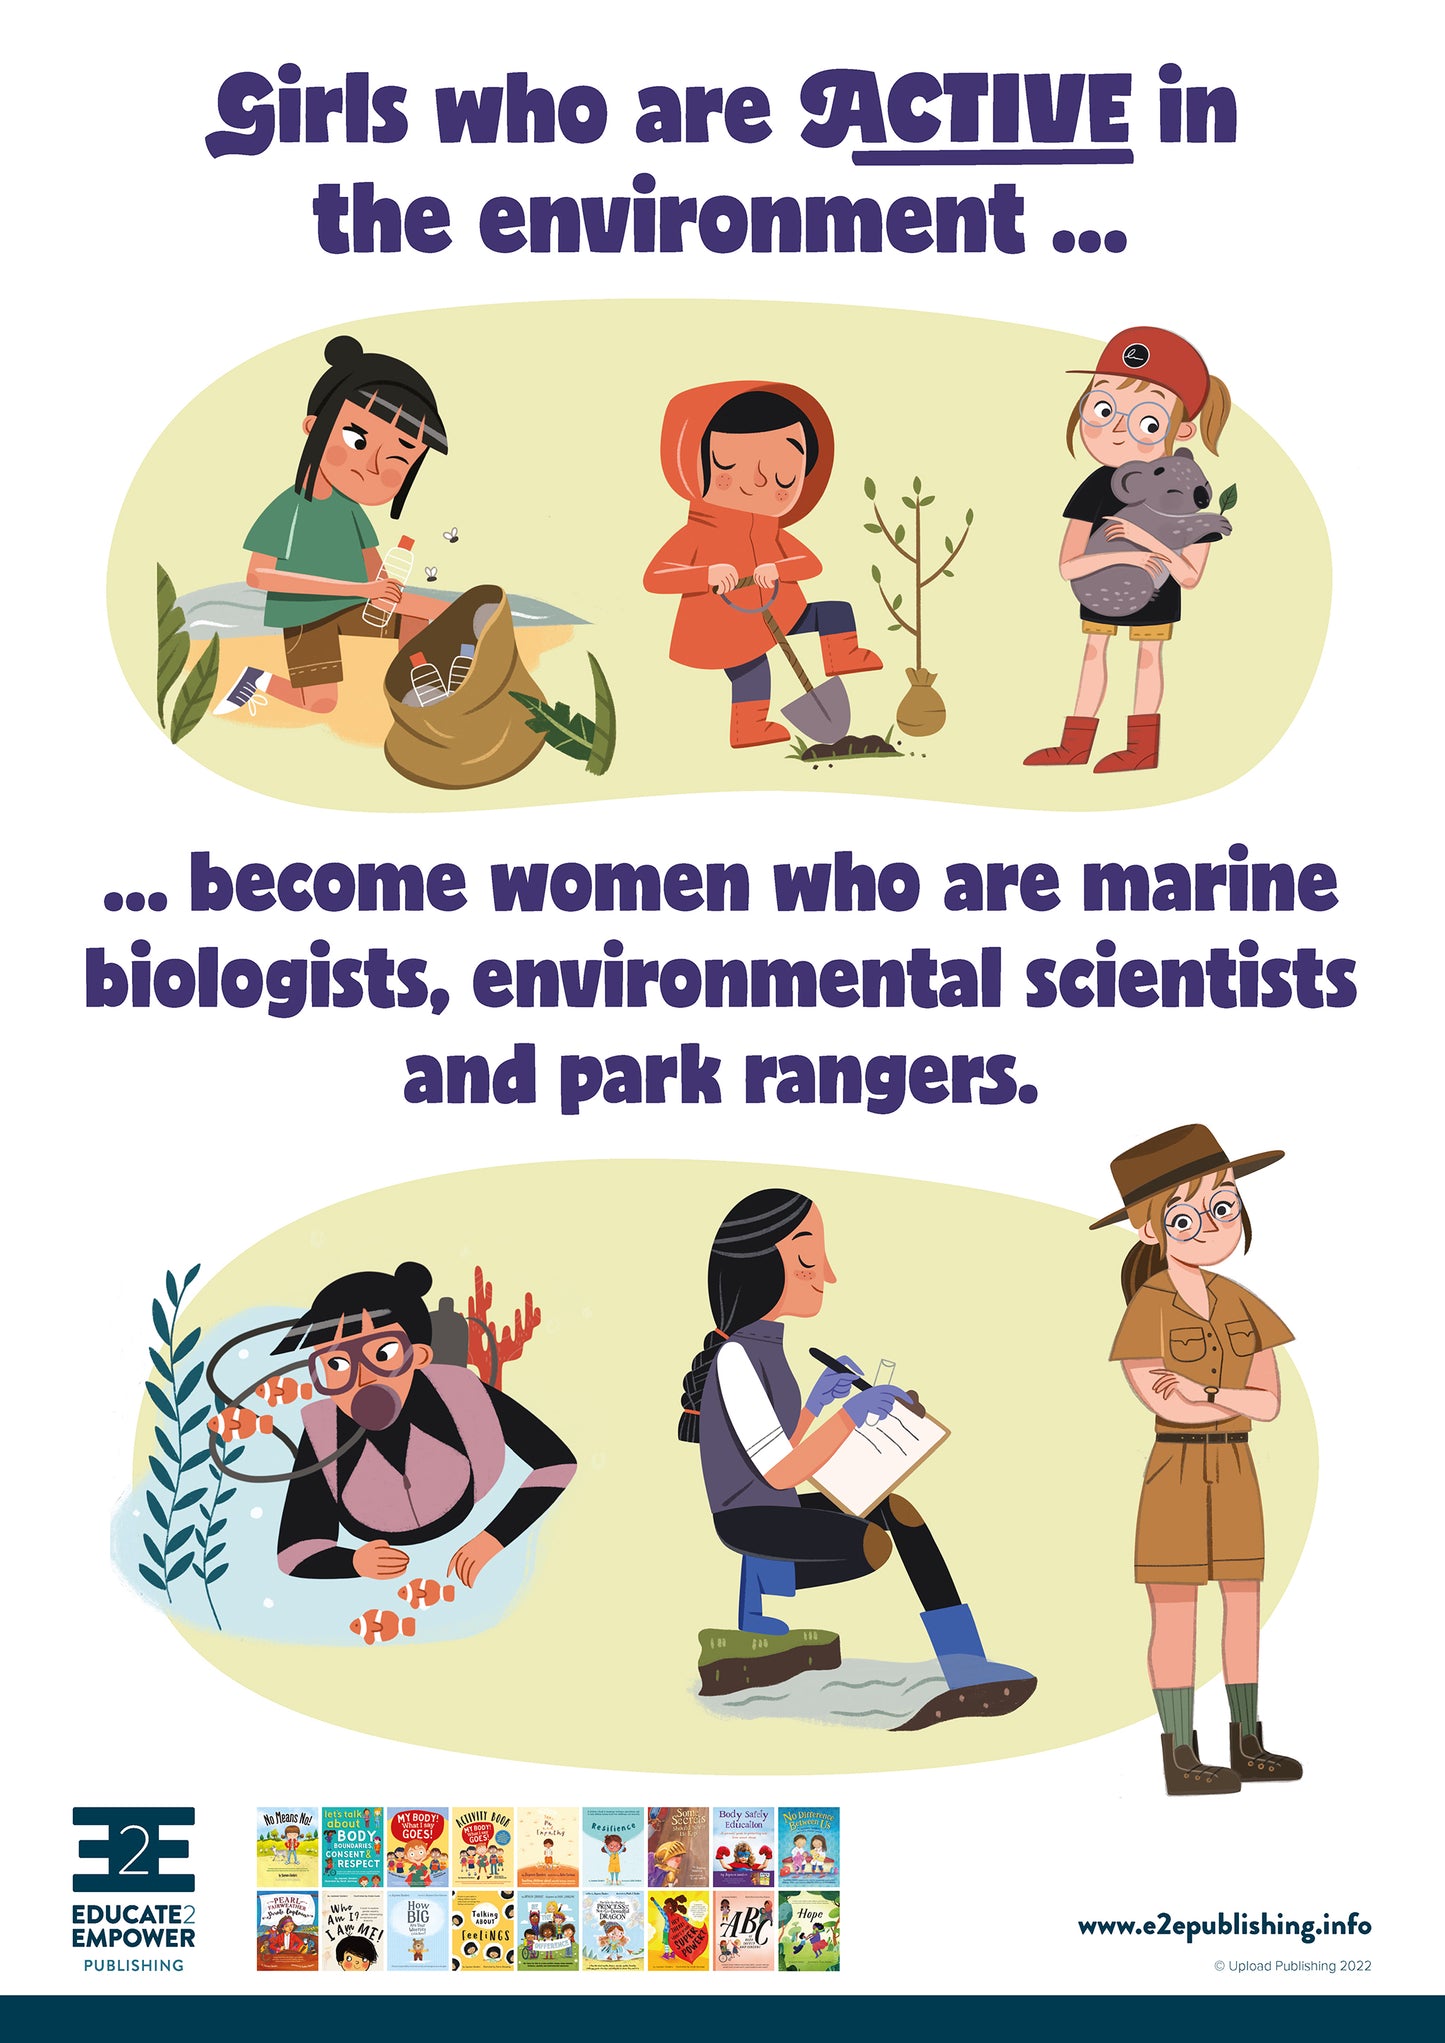 A Poster for children titled 'Girls who are Active in the Environment... become women who are marine biologists, environmental scientists and park ranges.' This is accompanied by a cartoon image of three young girls engaged in environmental conservation and below this, the same three girls as adults pursuing careers in environmental occupations.